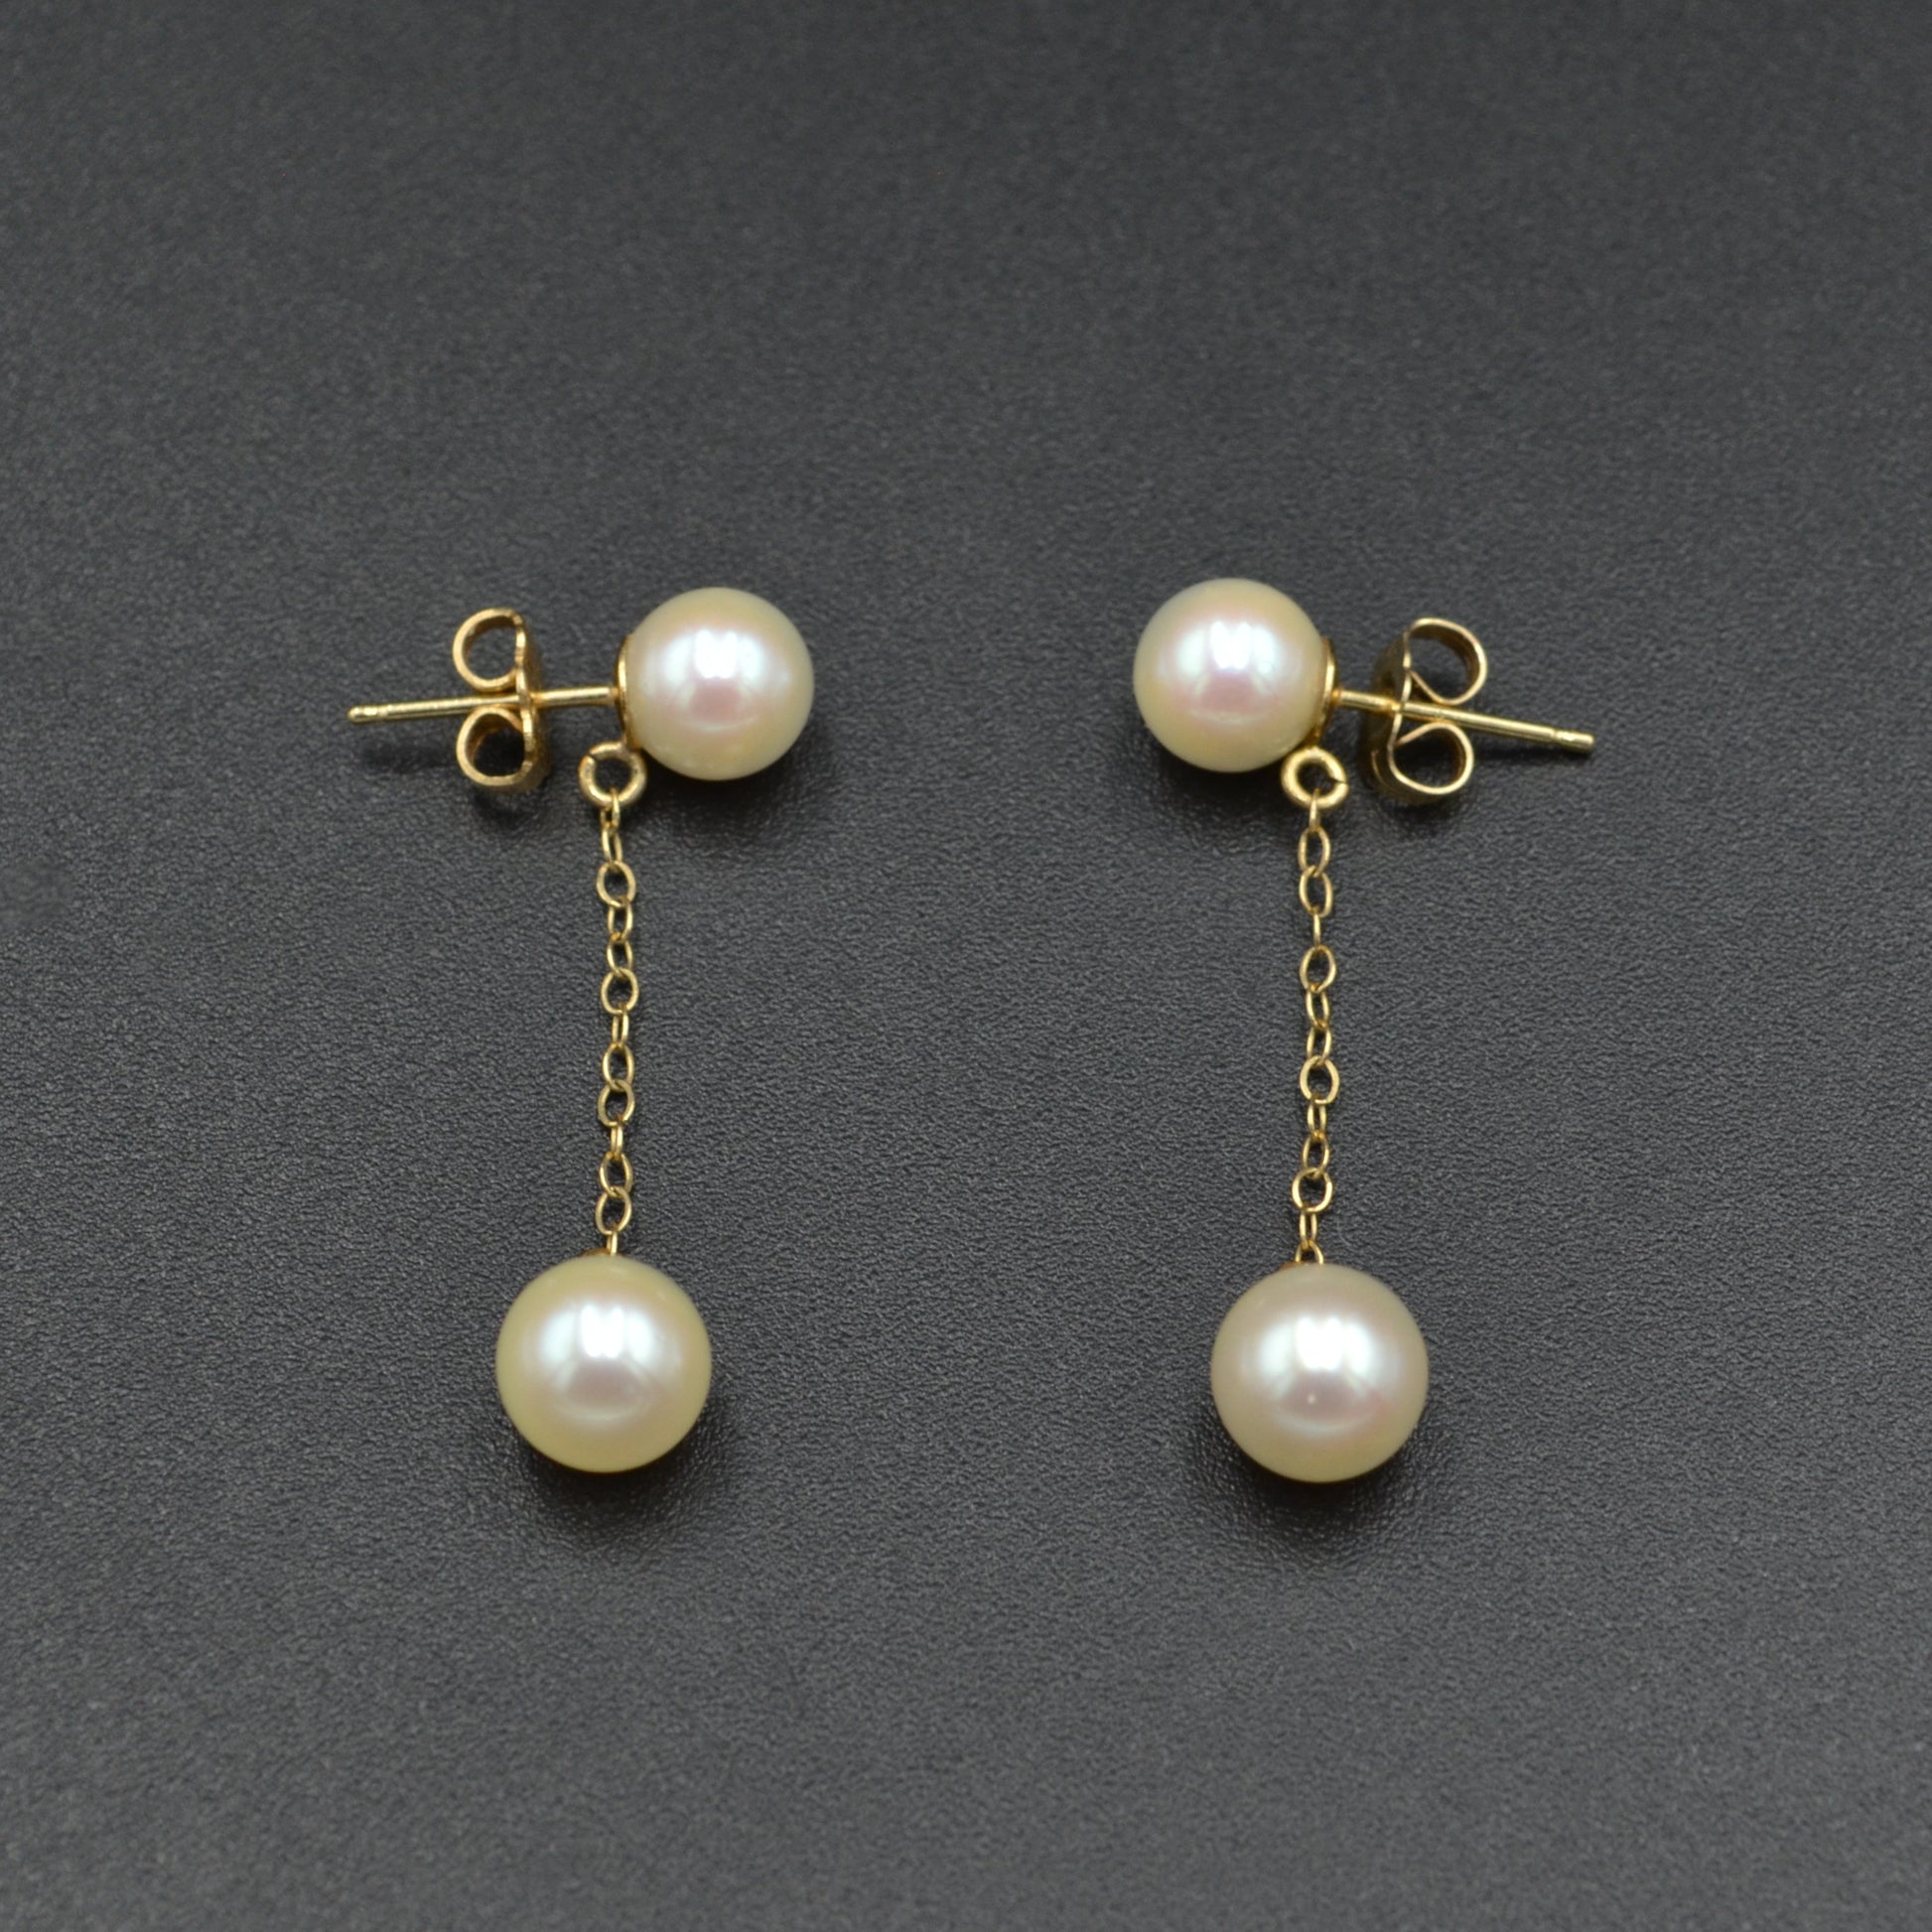 Double Pearl and Chain Dangle Drop Earrings in 14k Gold 